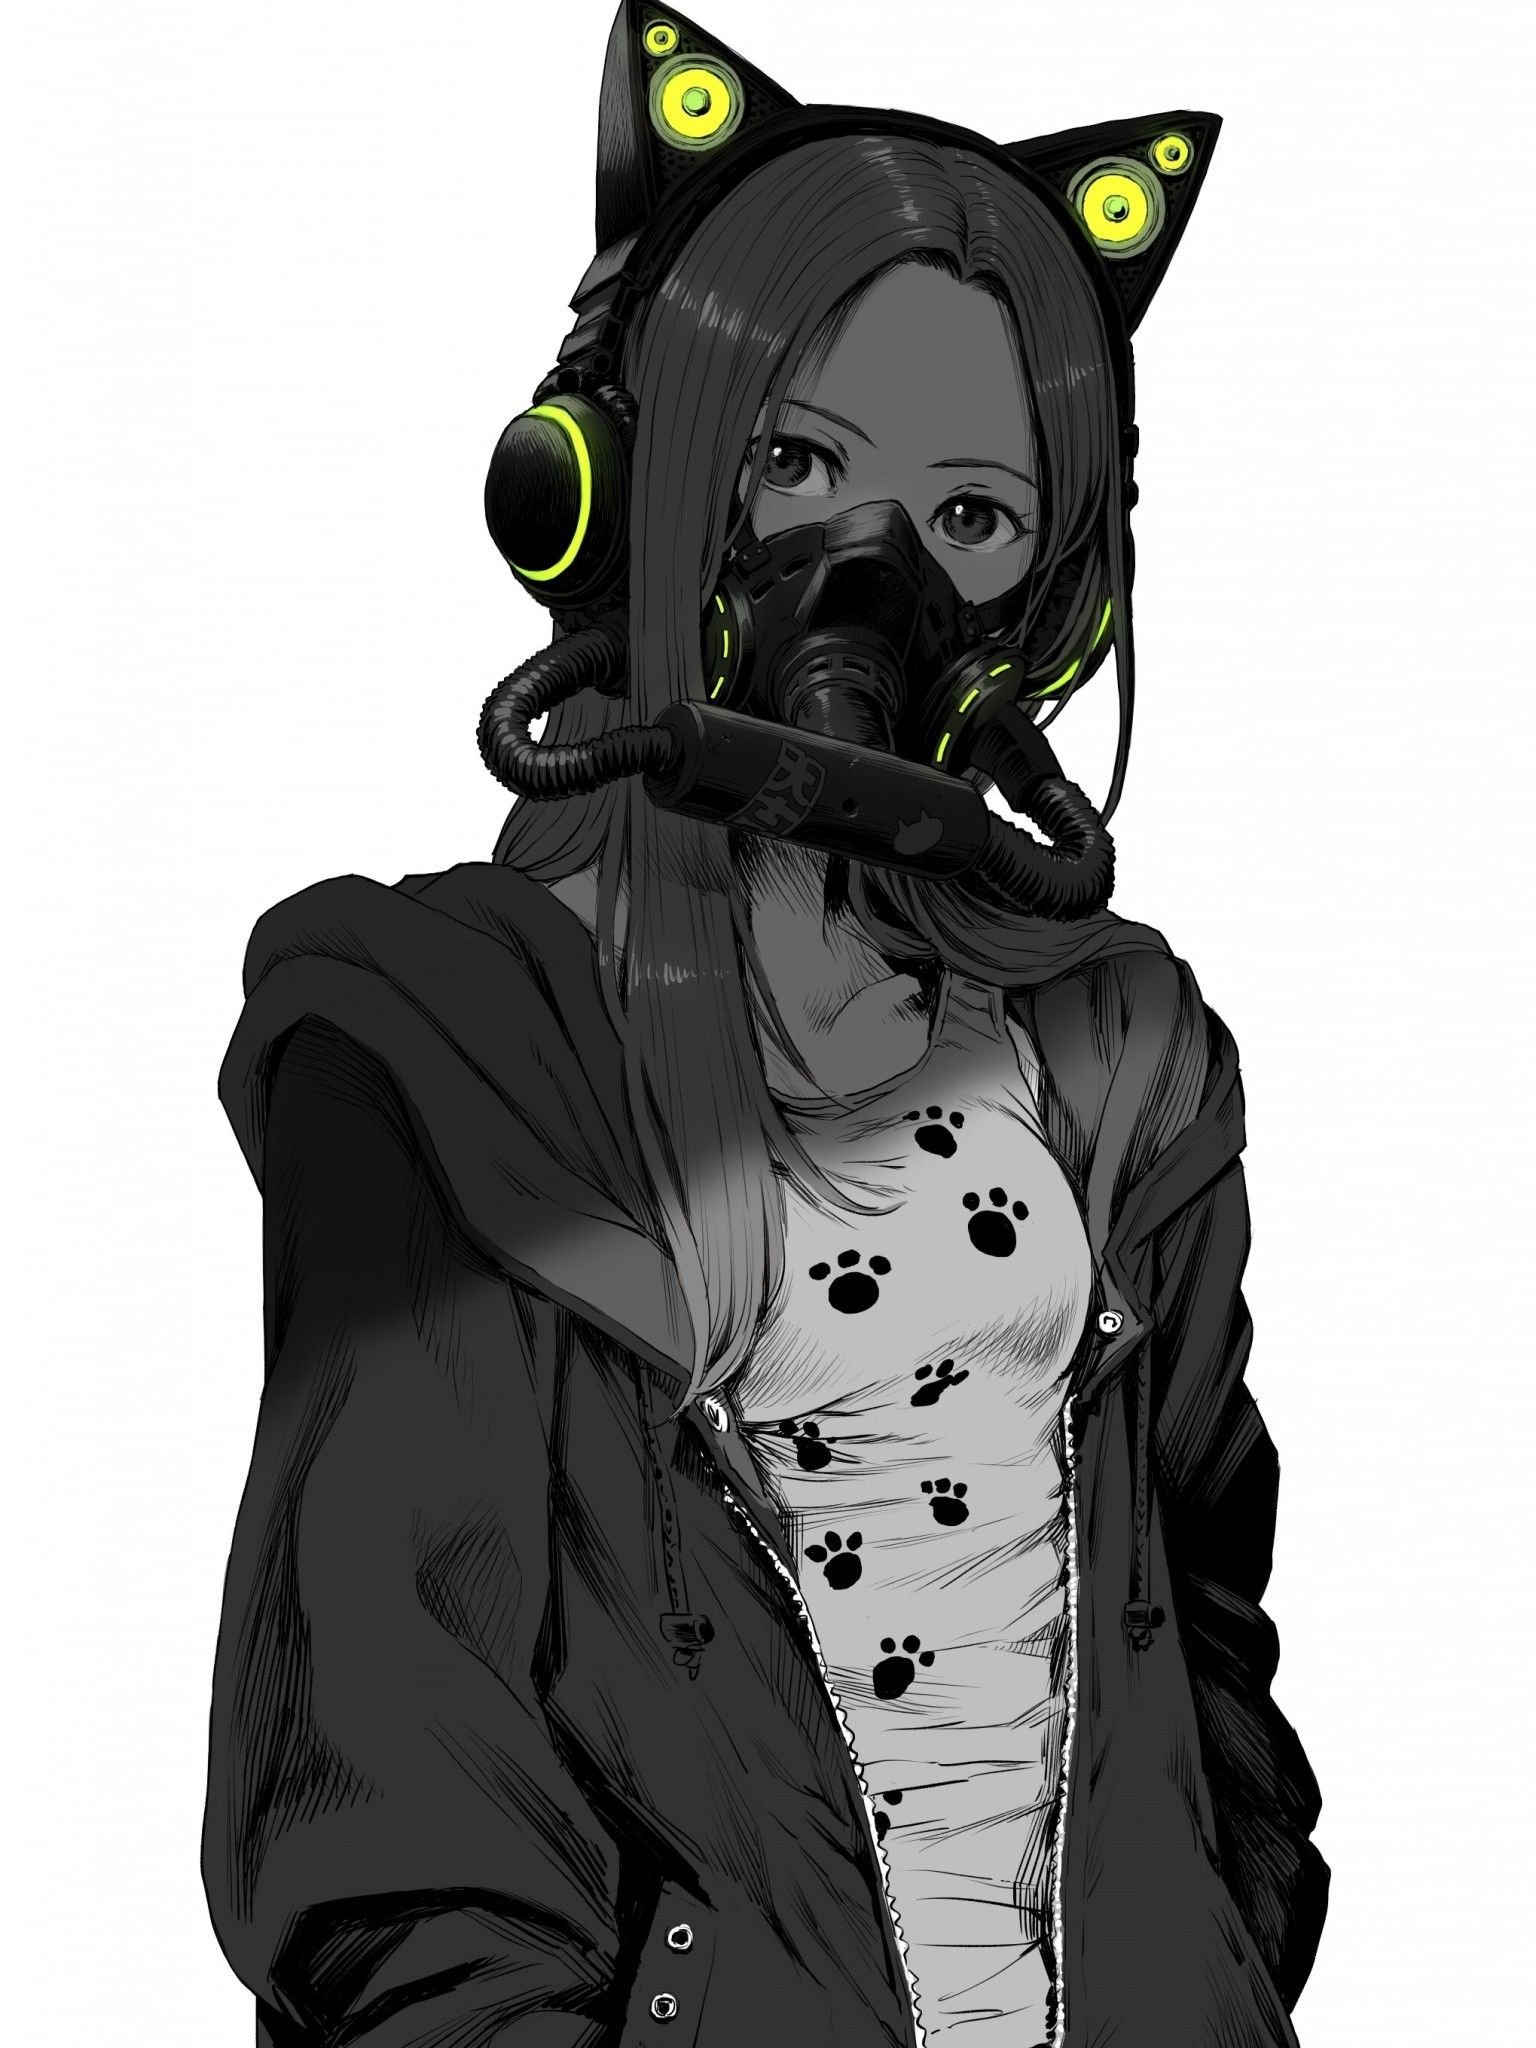 Download 1536x2048 Anime Girl, Mask, Jacket, Black And White